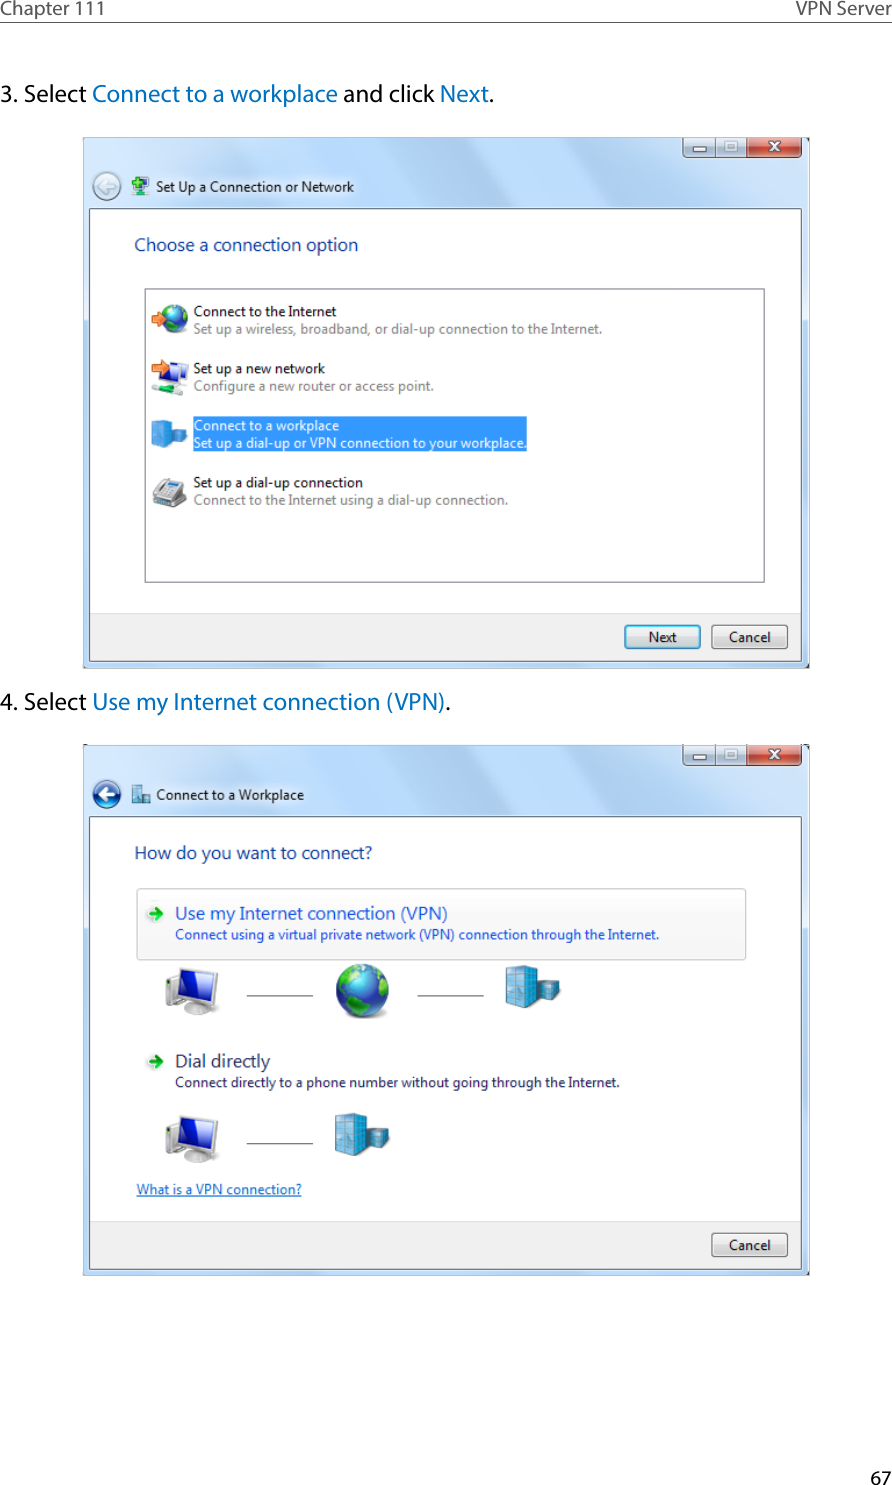 67Chapter 111 VPN Server3. Select Connect to a workplace and click Next.4. Select Use my Internet connection (VPN).